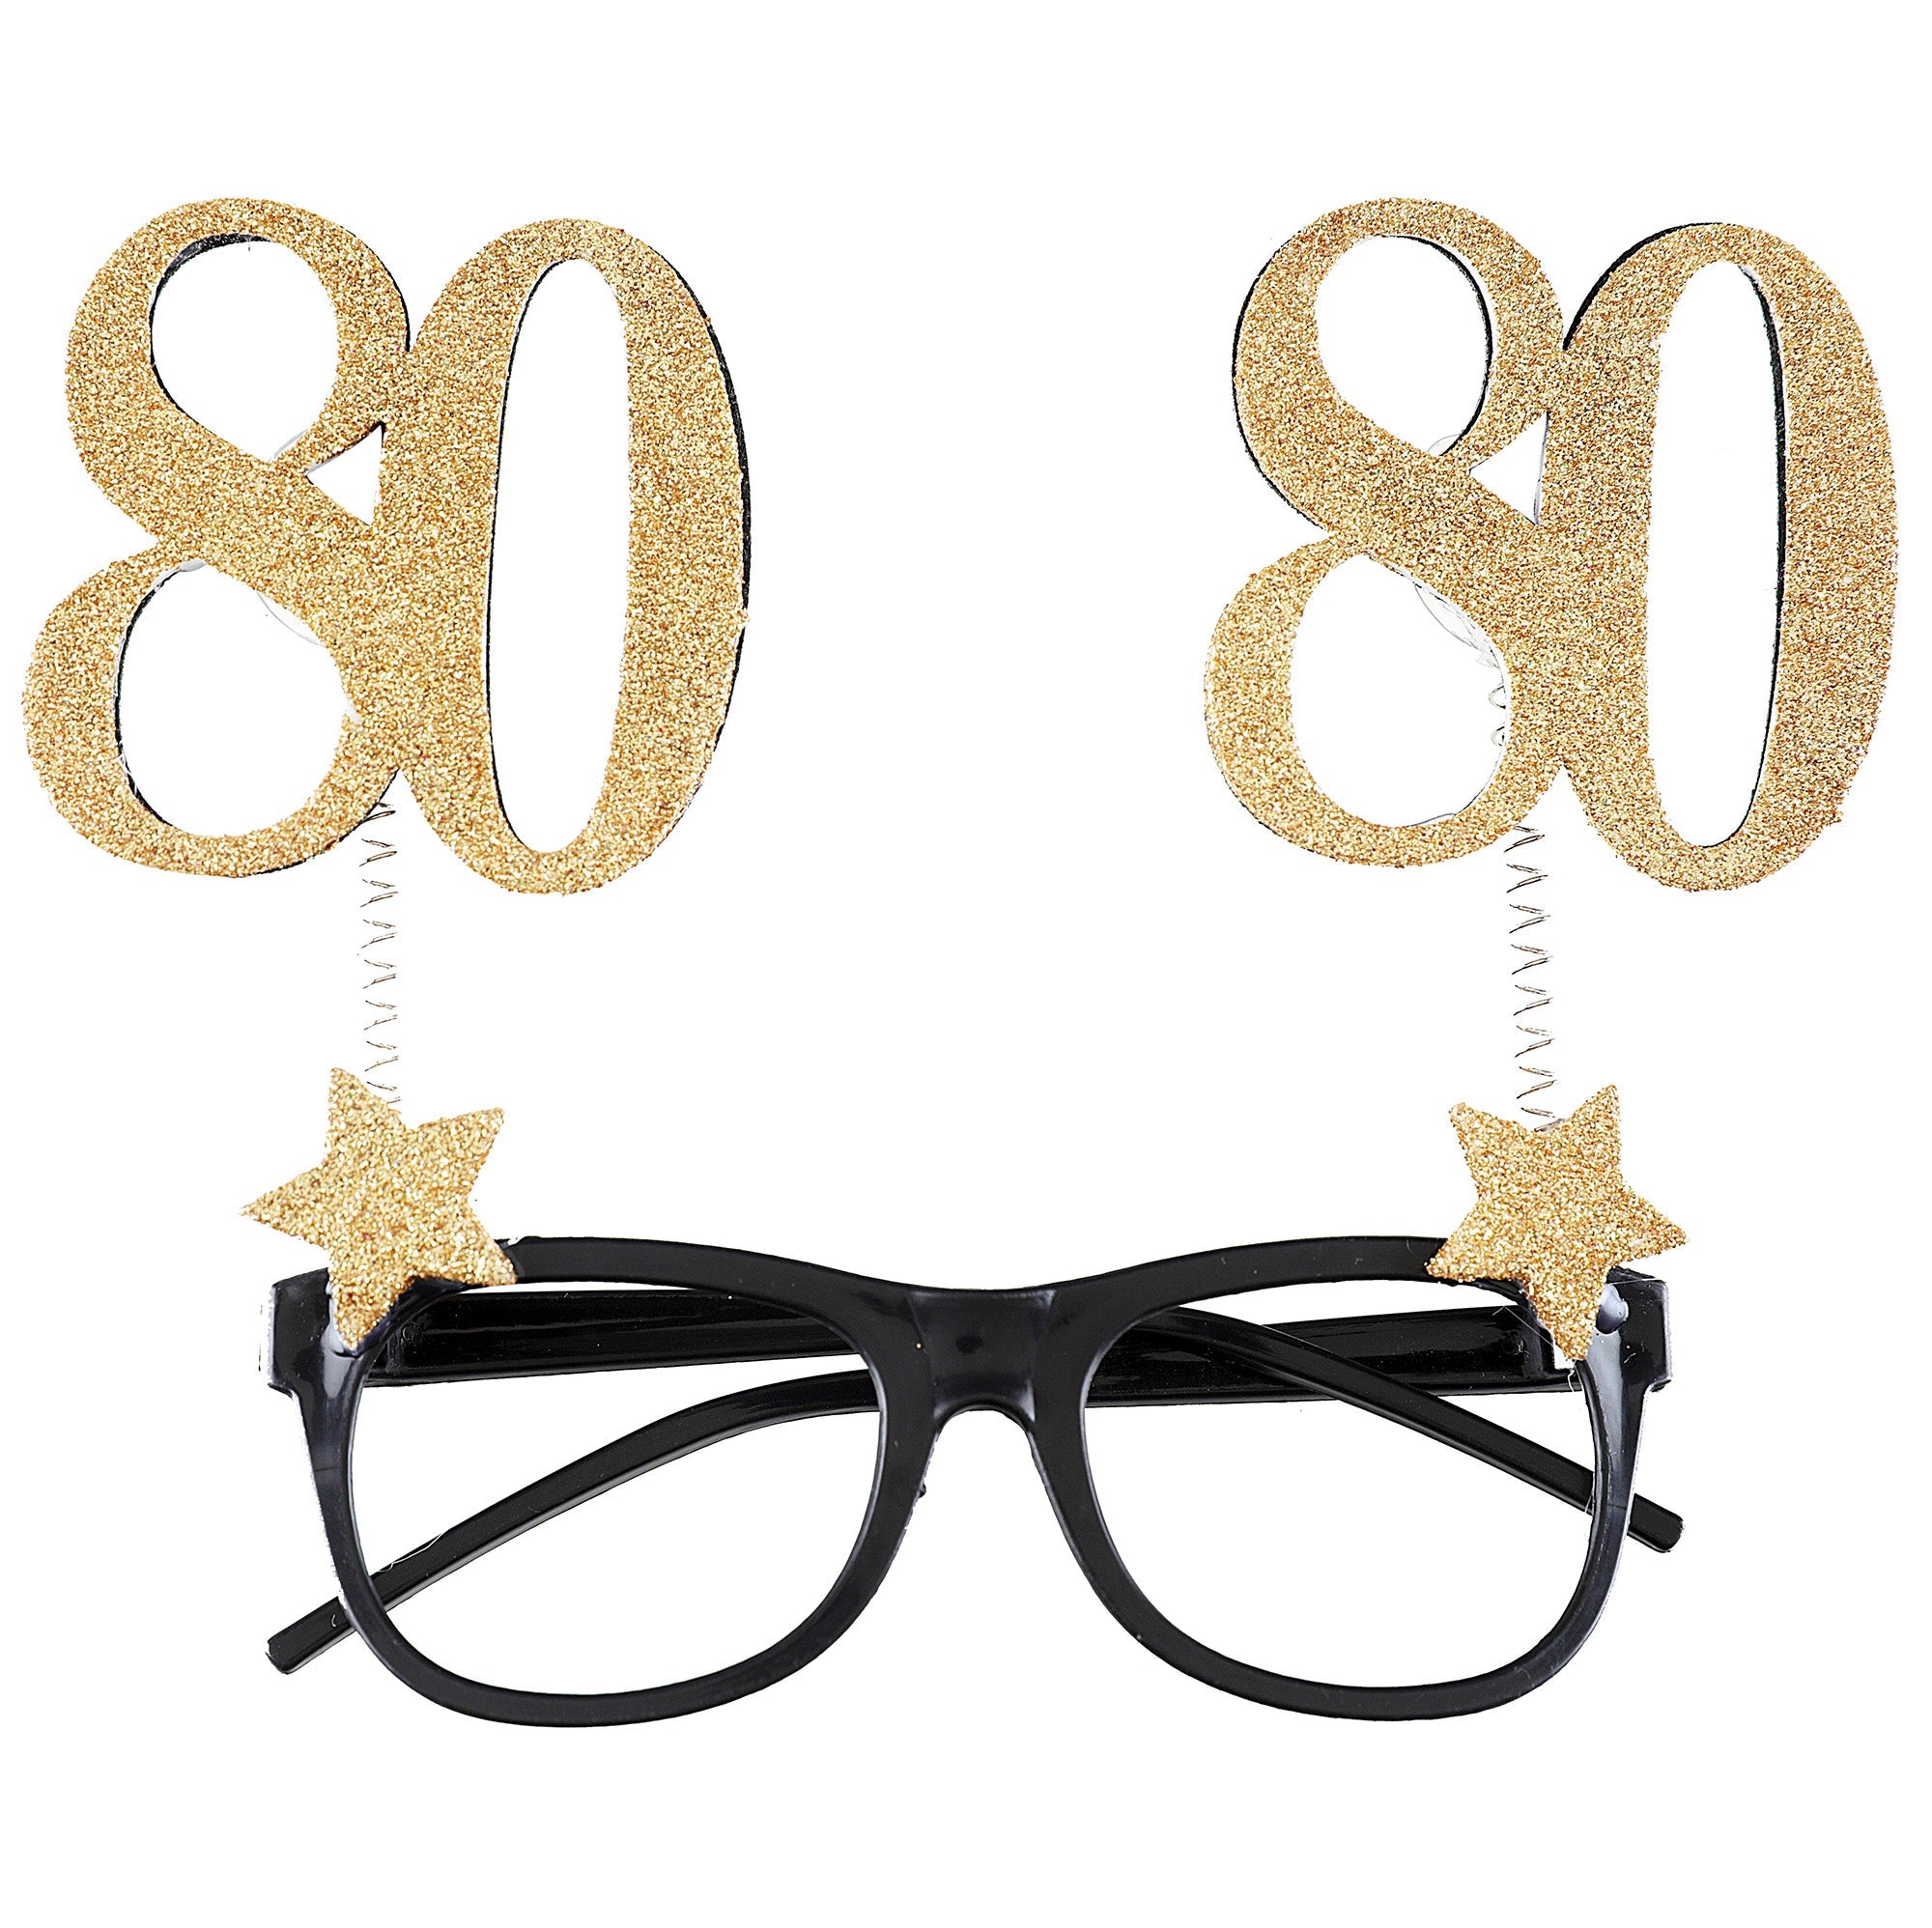 Age 80 Glasses Black and Gold 6x6.3in